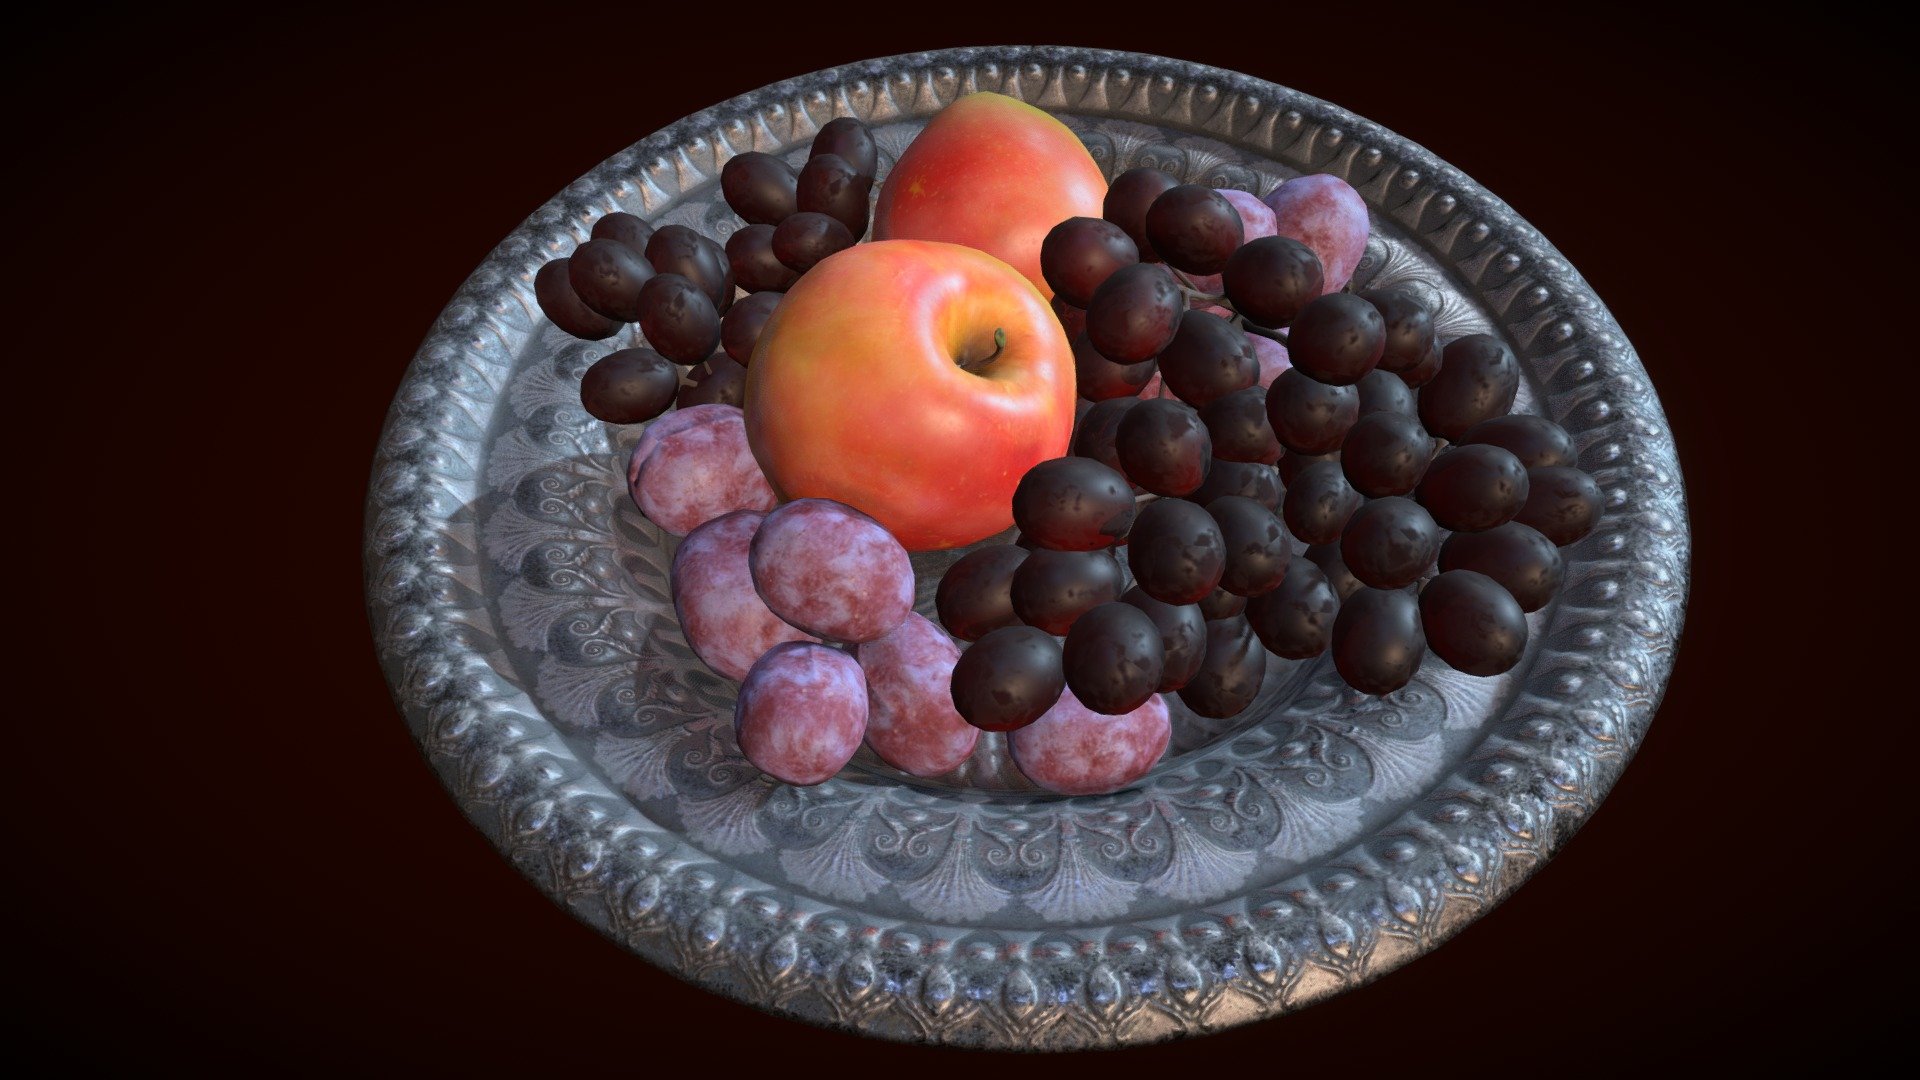 A victorian era fruit plate from my victorian still life.
It was done in Blender, Substance Designer, Substance Painter and 3D Coat.
To create the engravings on the plate, I modeled and rendered the shapes in Blender as a height map and used them as a brush in sculpt mode with radial symmetry in Blender and as an alpha with radial symmetry in Substance Painter.

The translucency material for the grapes was a little tricky in realtime render engines and since I didn't like the SSS result in Sketchfab, I used refractive opacity to fake the translucency 3d model